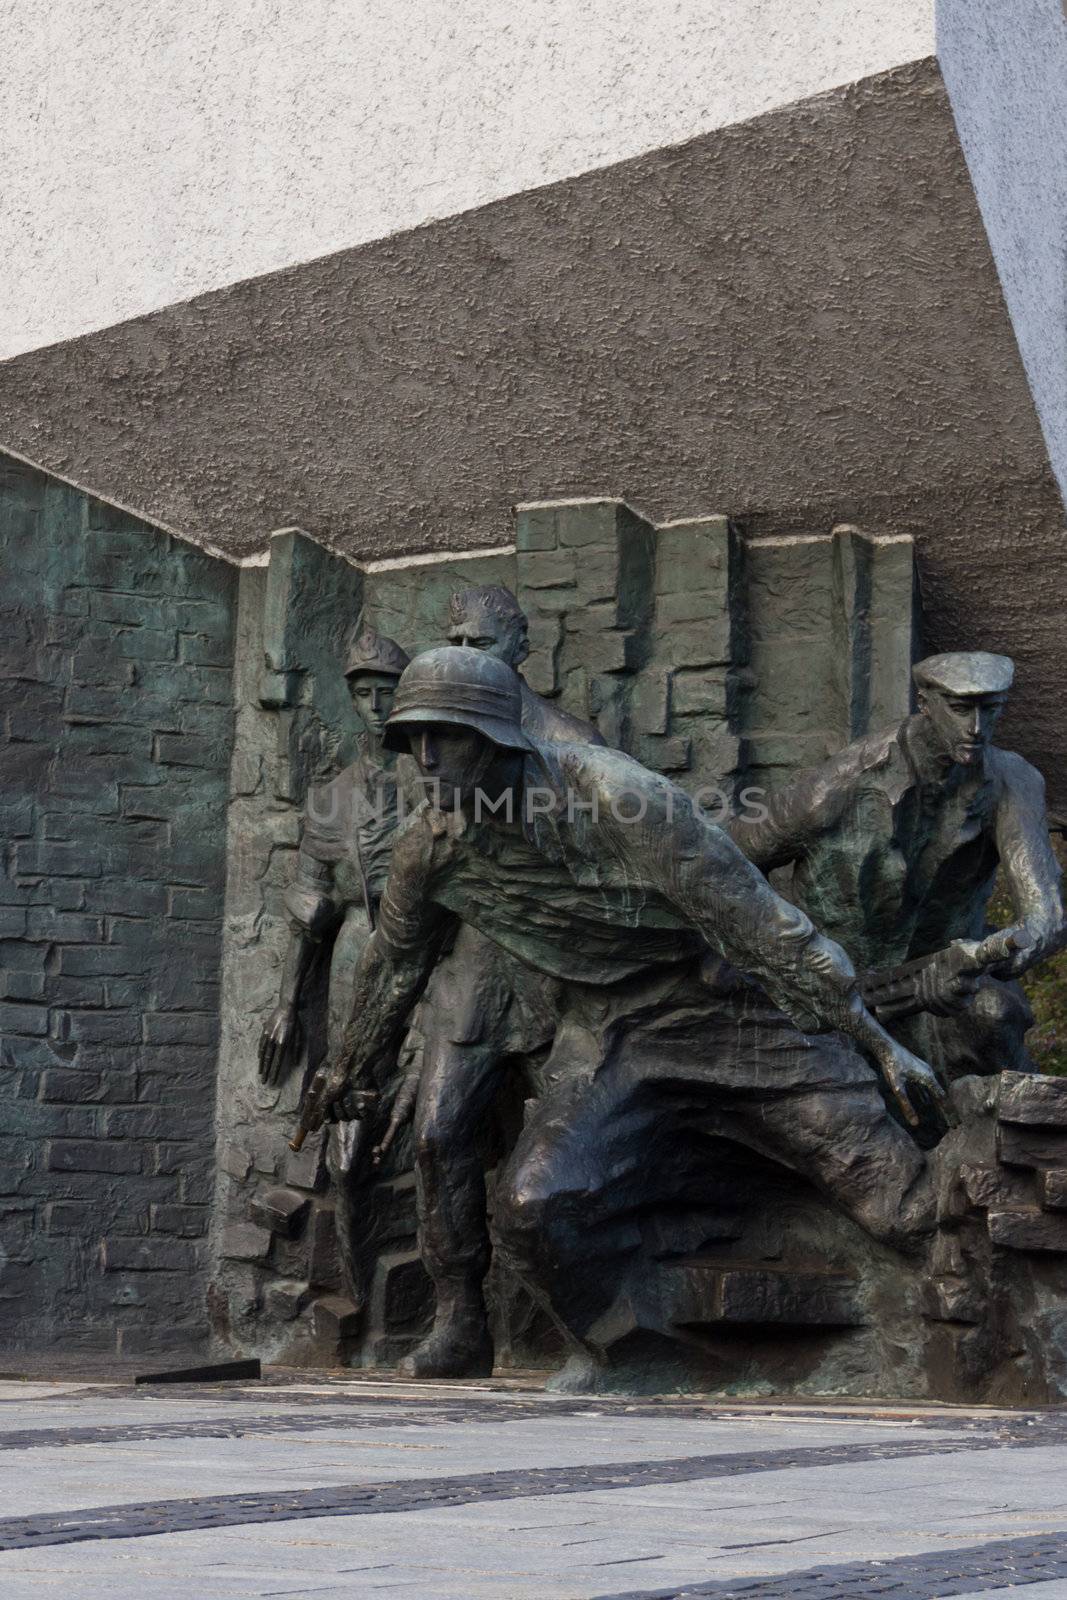 A part of Warsaw's uprising memorial in Poland